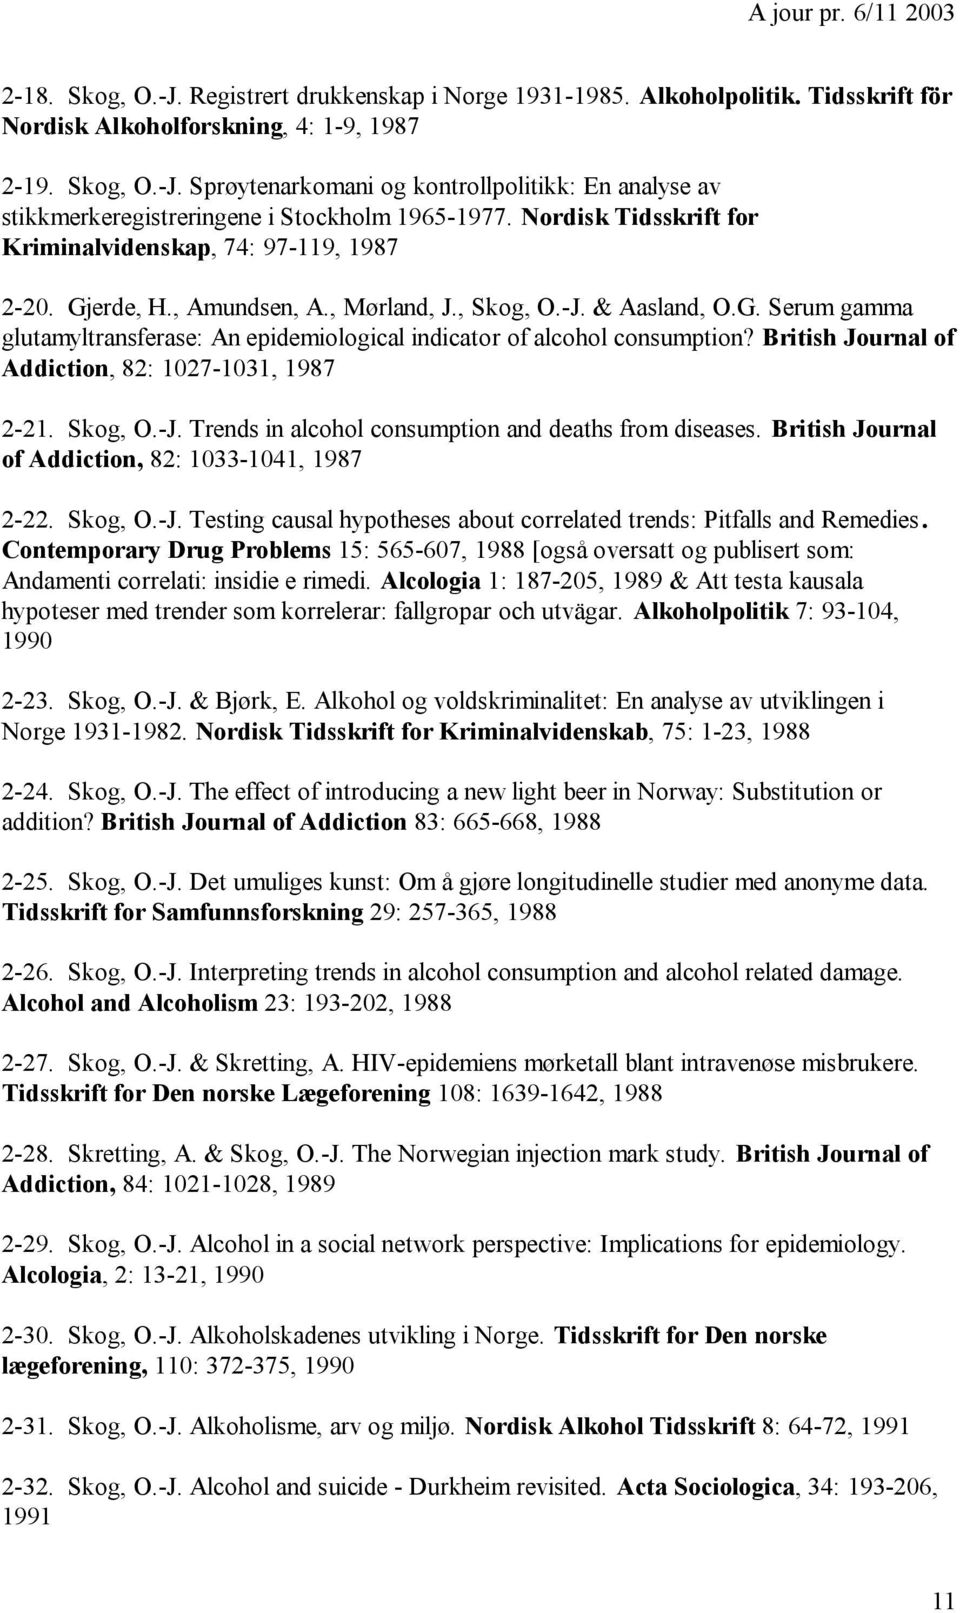 British Journal of Addiction, 82: 1027-1031, 1987 2-21. Skog, O.-J. Trends in alcohol consumption and deaths from diseases. British Journal of Addiction, 82: 1033-1041, 1987 2-22. Skog, O.-J. Testing causal hypotheses about correlated trends: Pitfalls and Remedies.